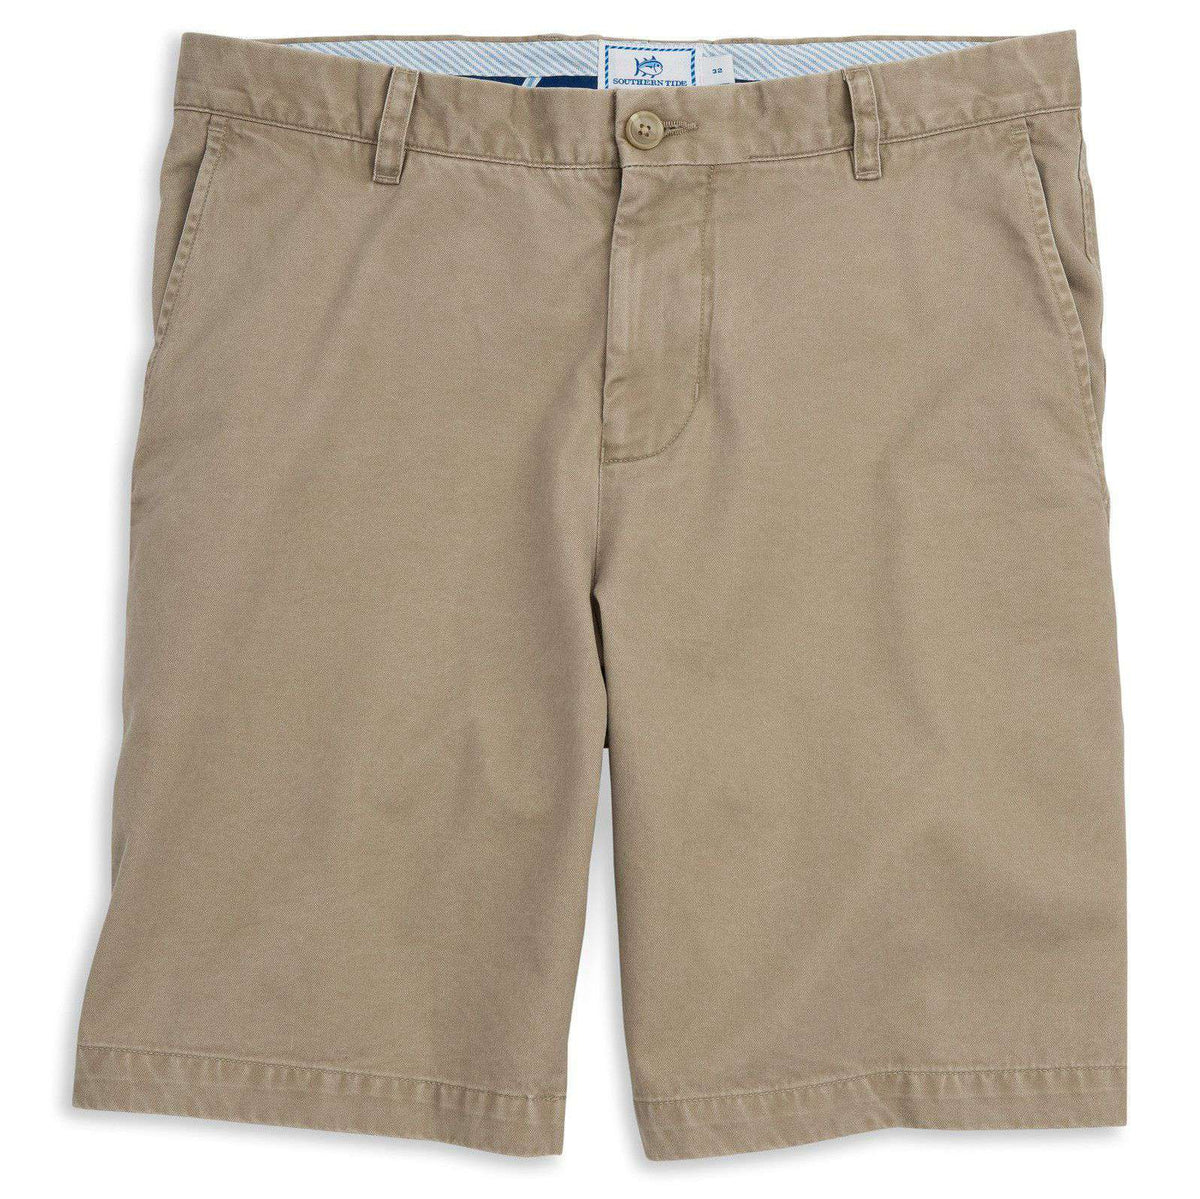 The Skipjack 9" Short in Sandstone Khaki by Southern Tide - Country Club Prep